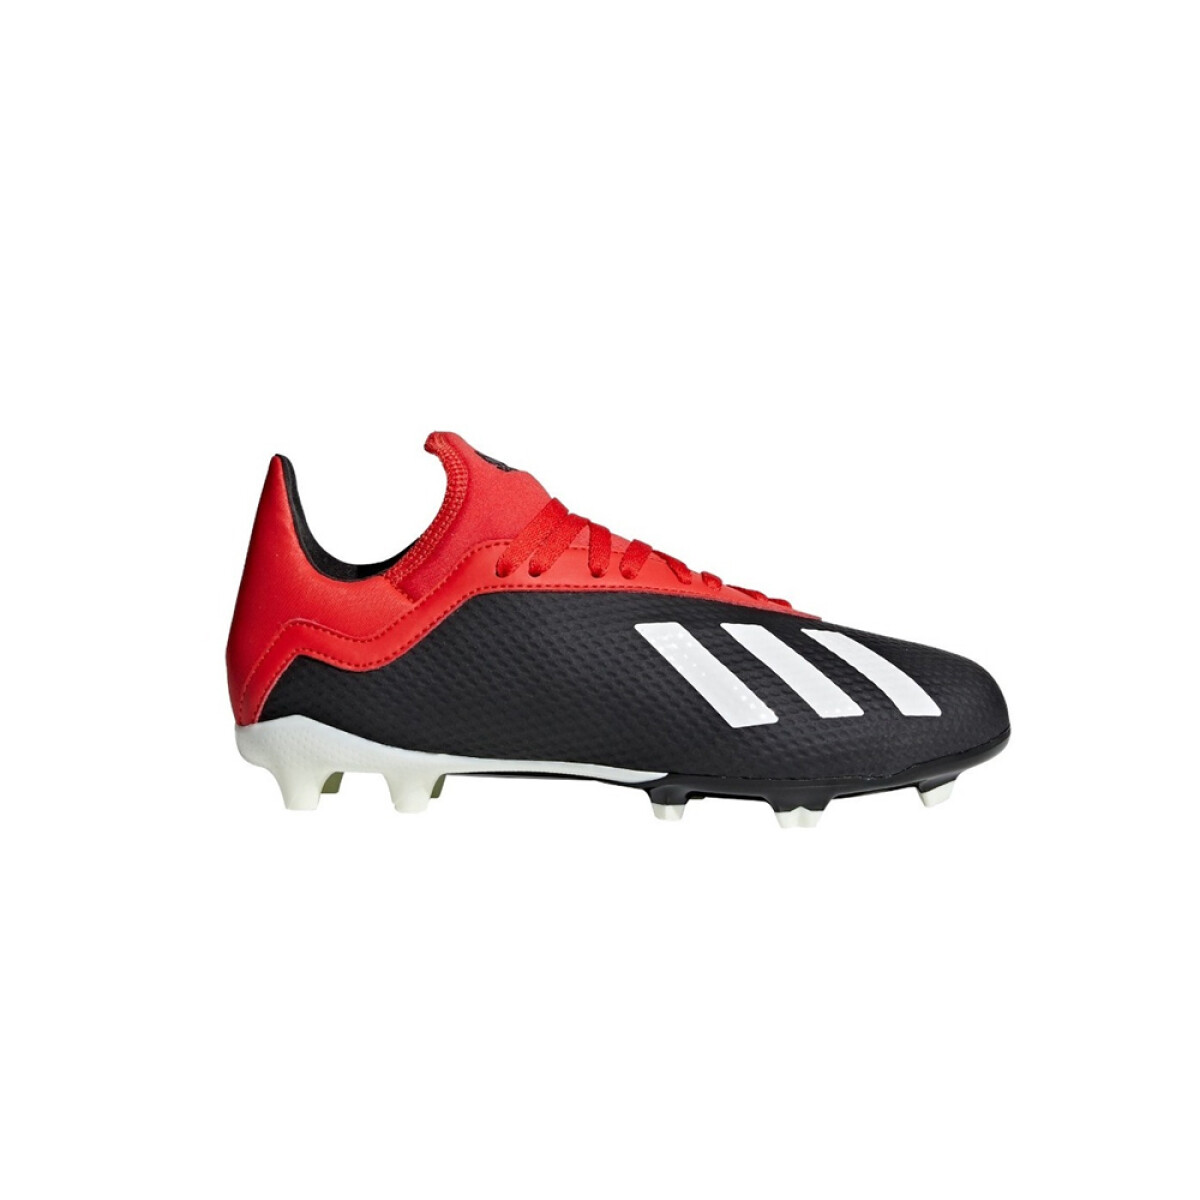 adidas X 18.3 FIRM GROUND CLEATS - Black/Red/White 